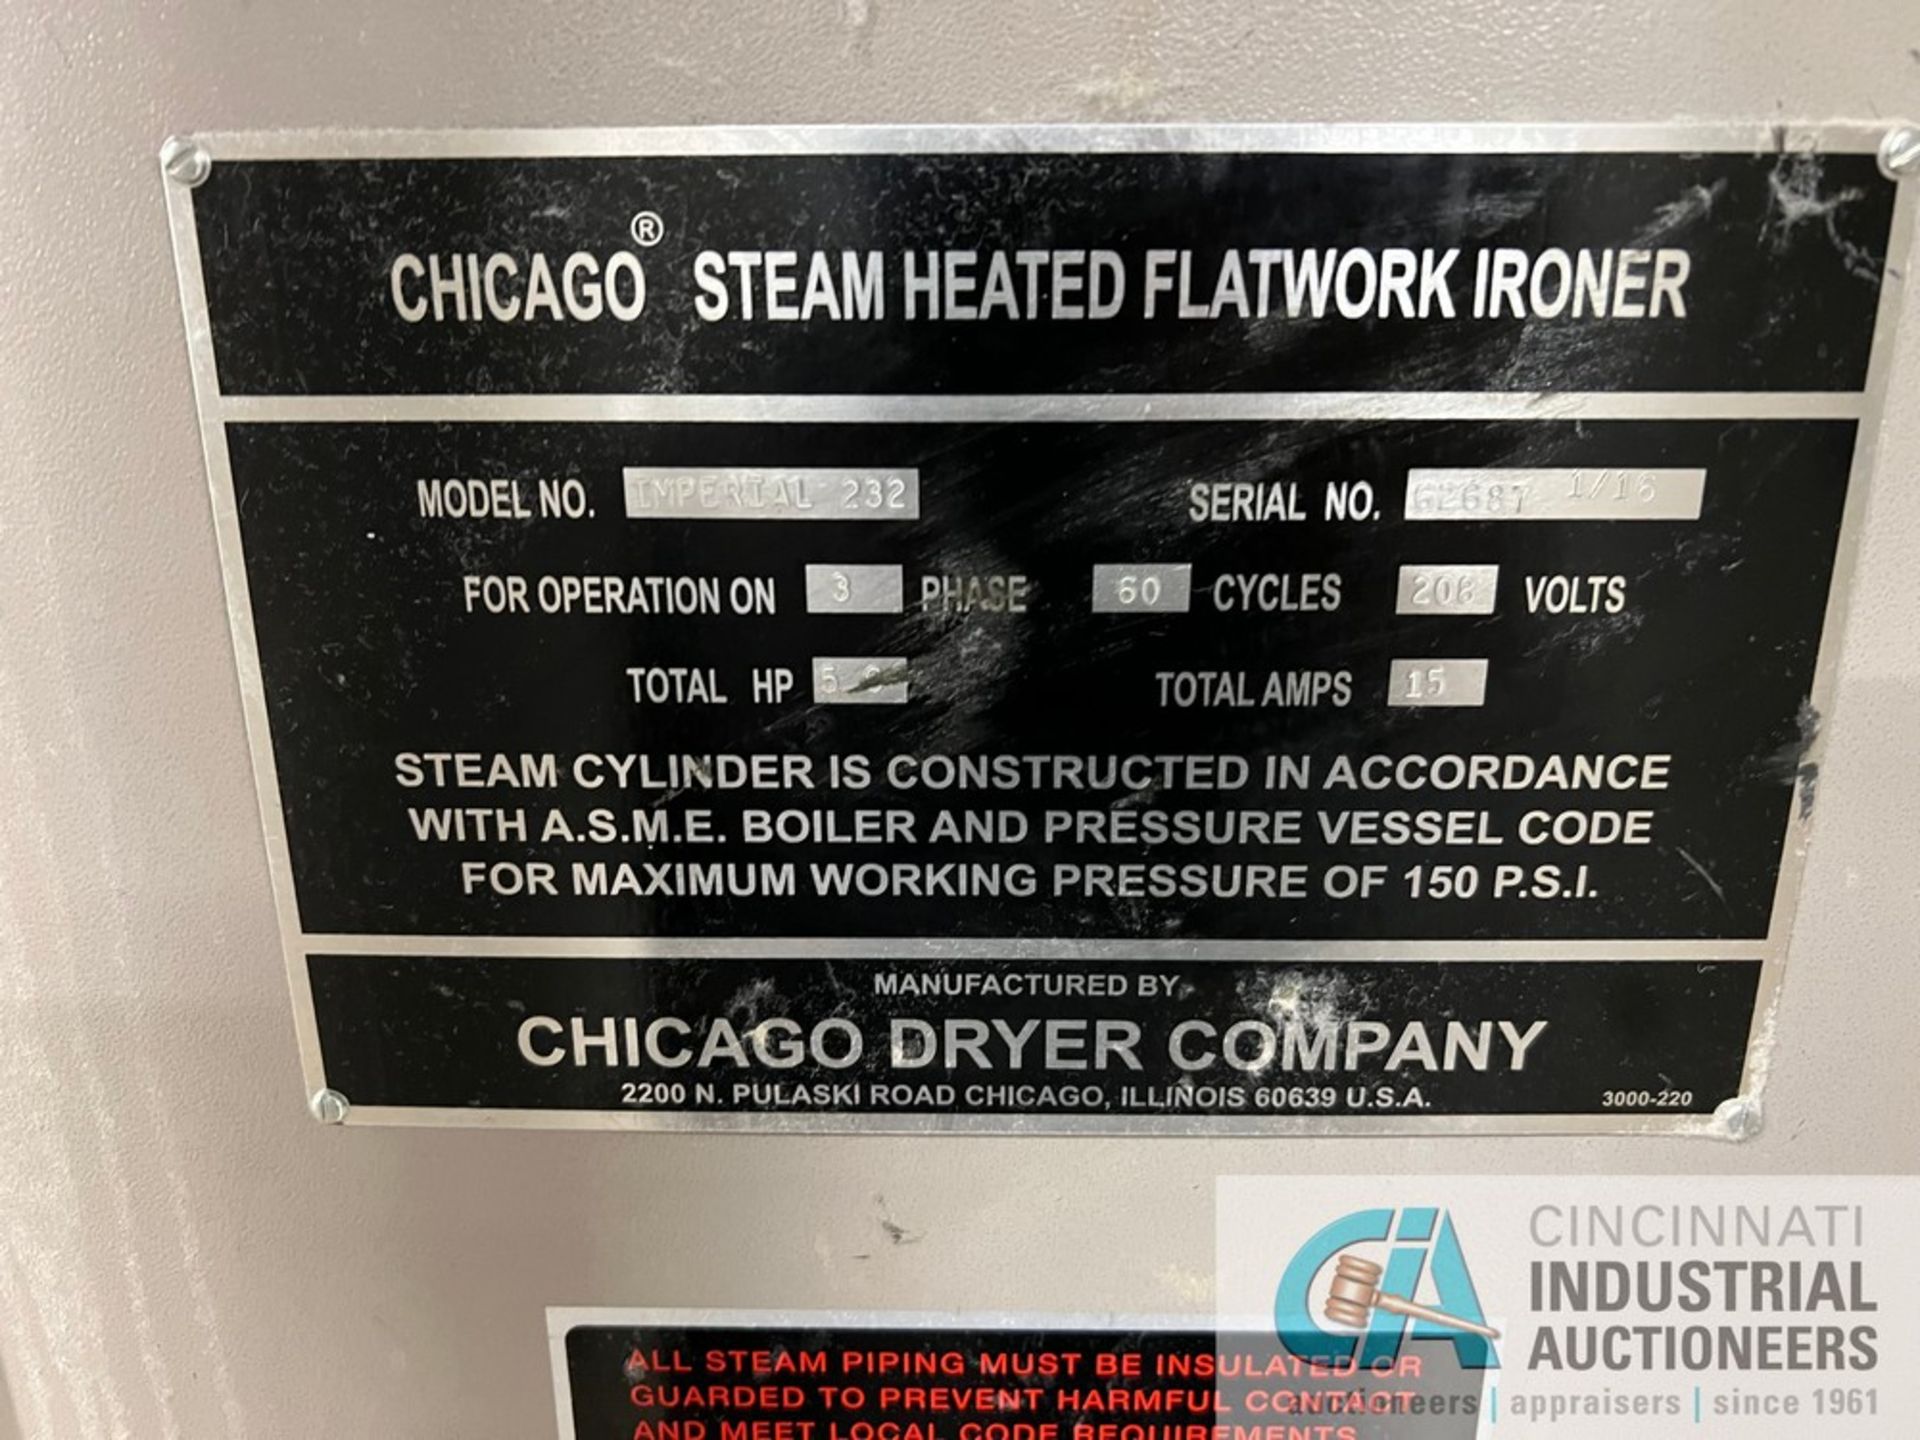 120" CHICAGO MODEL IMPERIAL 232 TWO-ROLL STEAM HEATED FLATWORK IRONER; S/N 62687, (2) 32" DIAMETER - Image 4 of 12